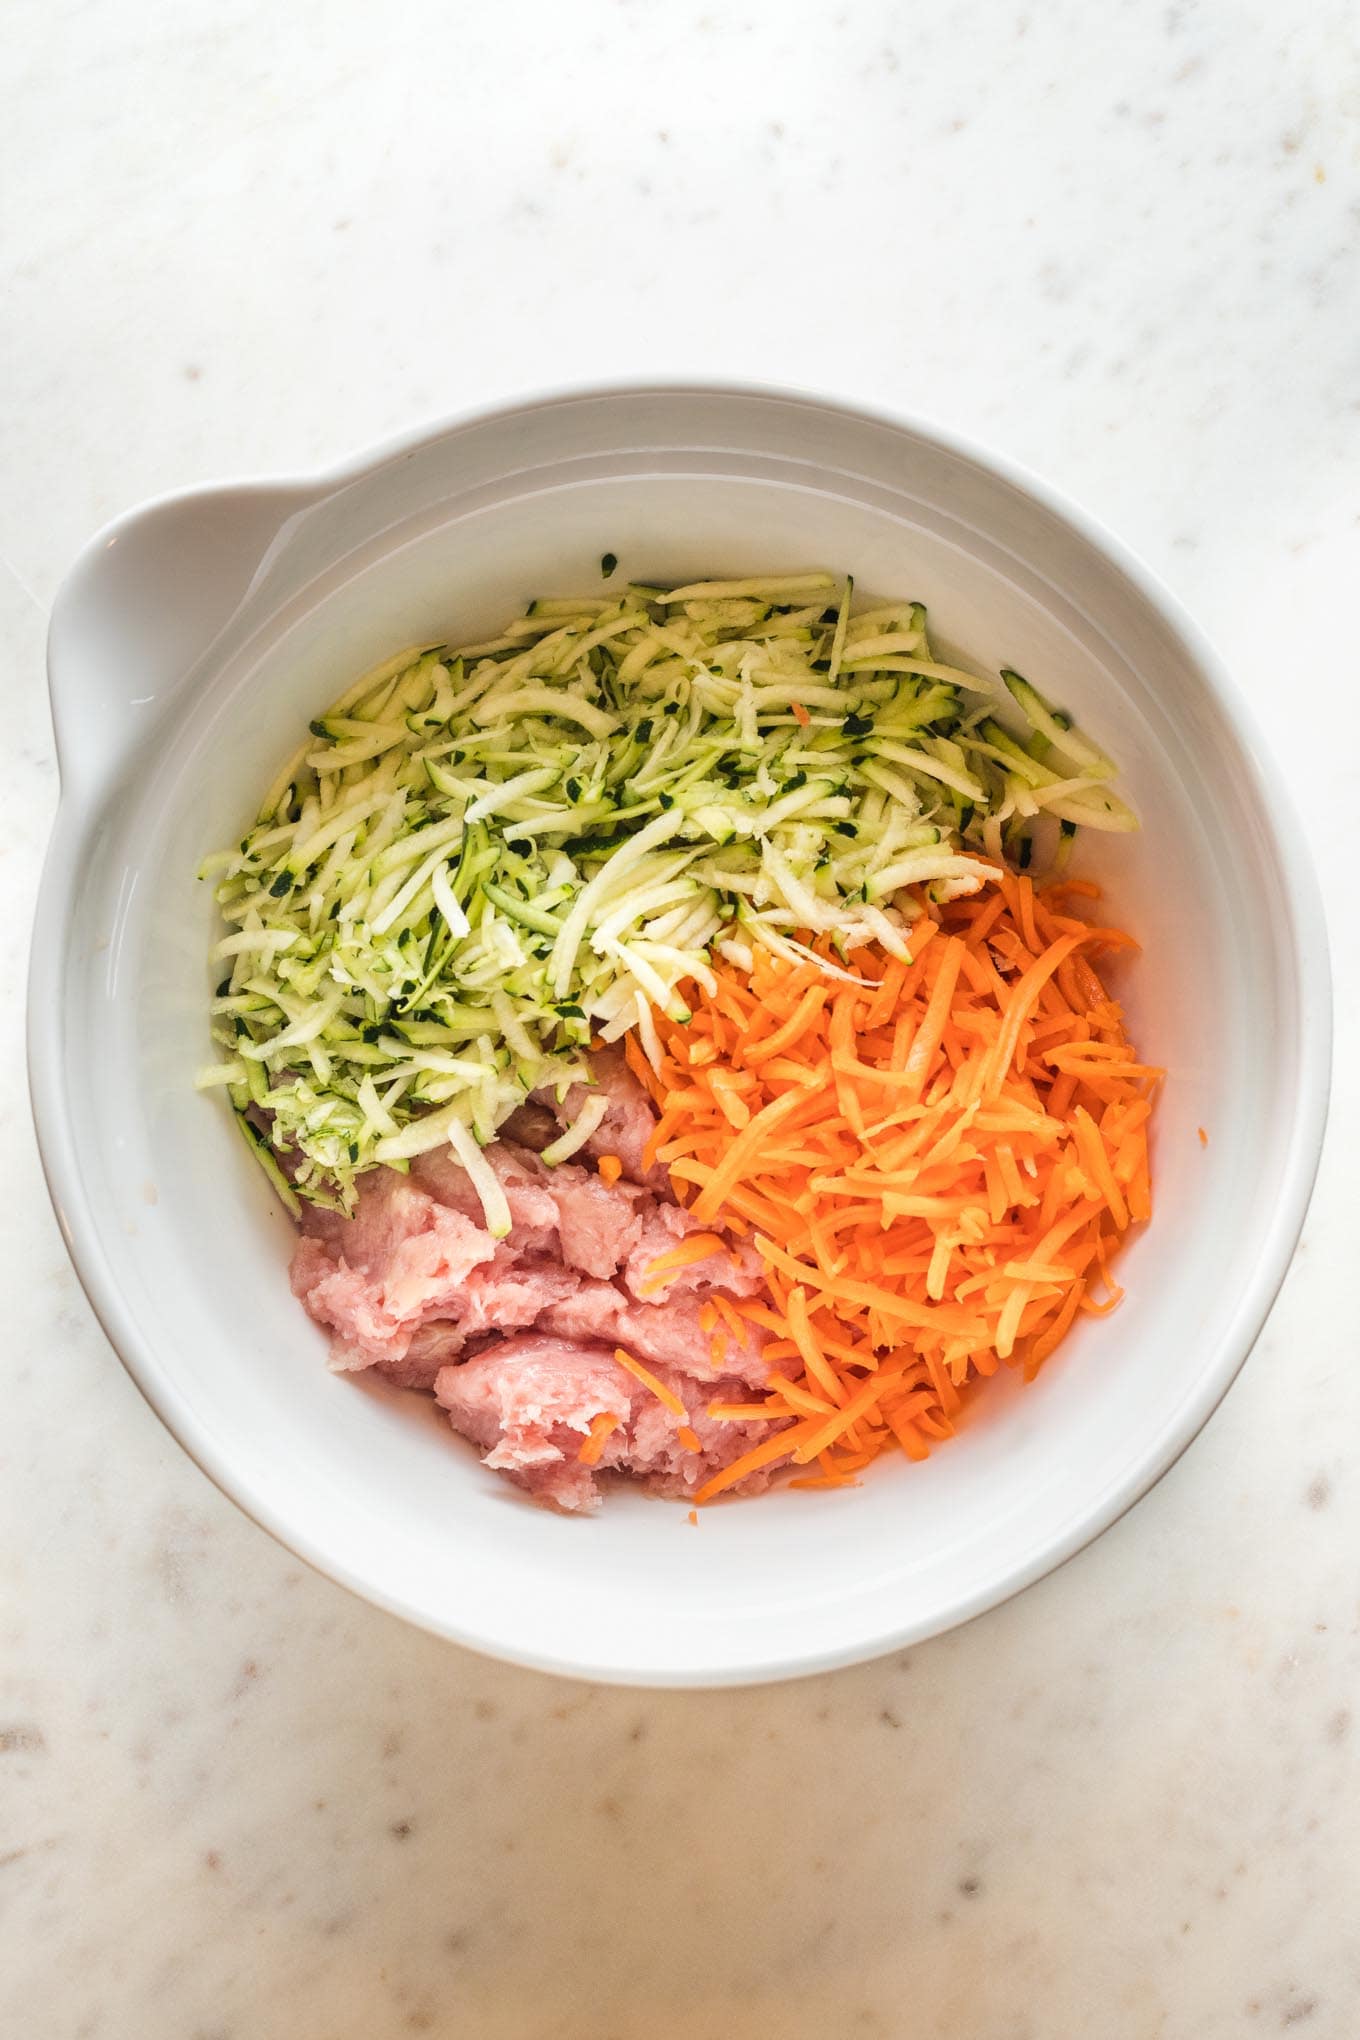 Ground turkey, shredded carrots, and shredded zucchini in a white mixing bowl.